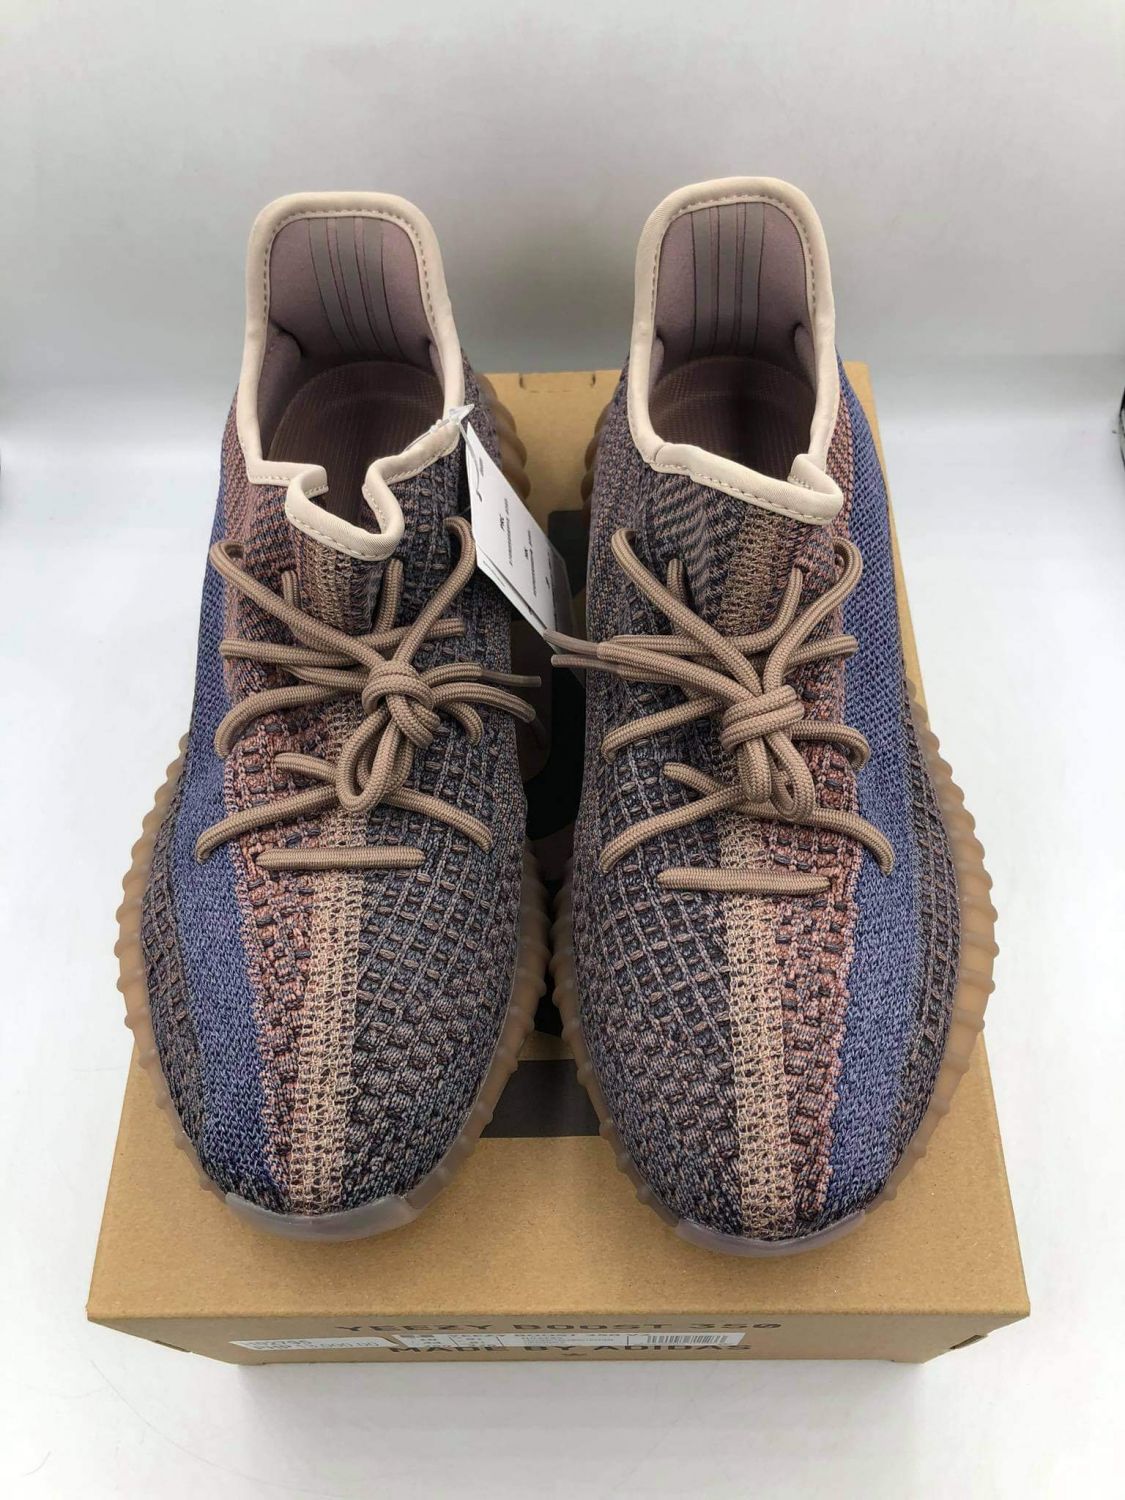 Adidas Yeezy Boost 350 V2 Fade | AfterMarket